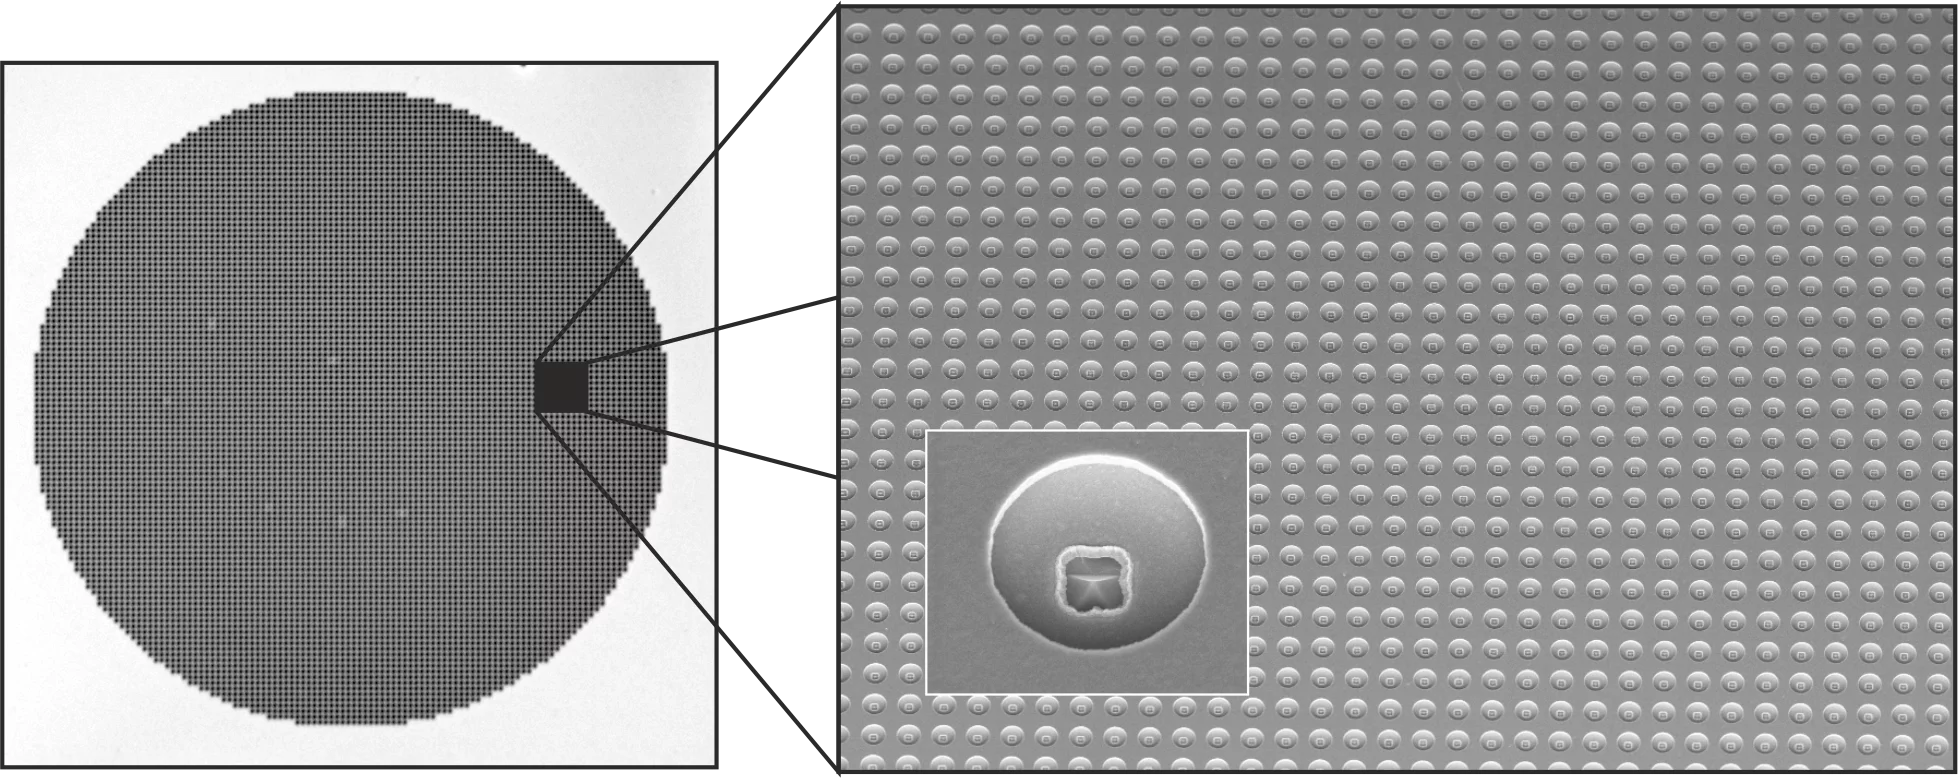 Double-gate FEA with 40'000 tips with 2 mm diameter. (Left) Overview, (Right) Closeup of a small part of the FEA and a single emitter